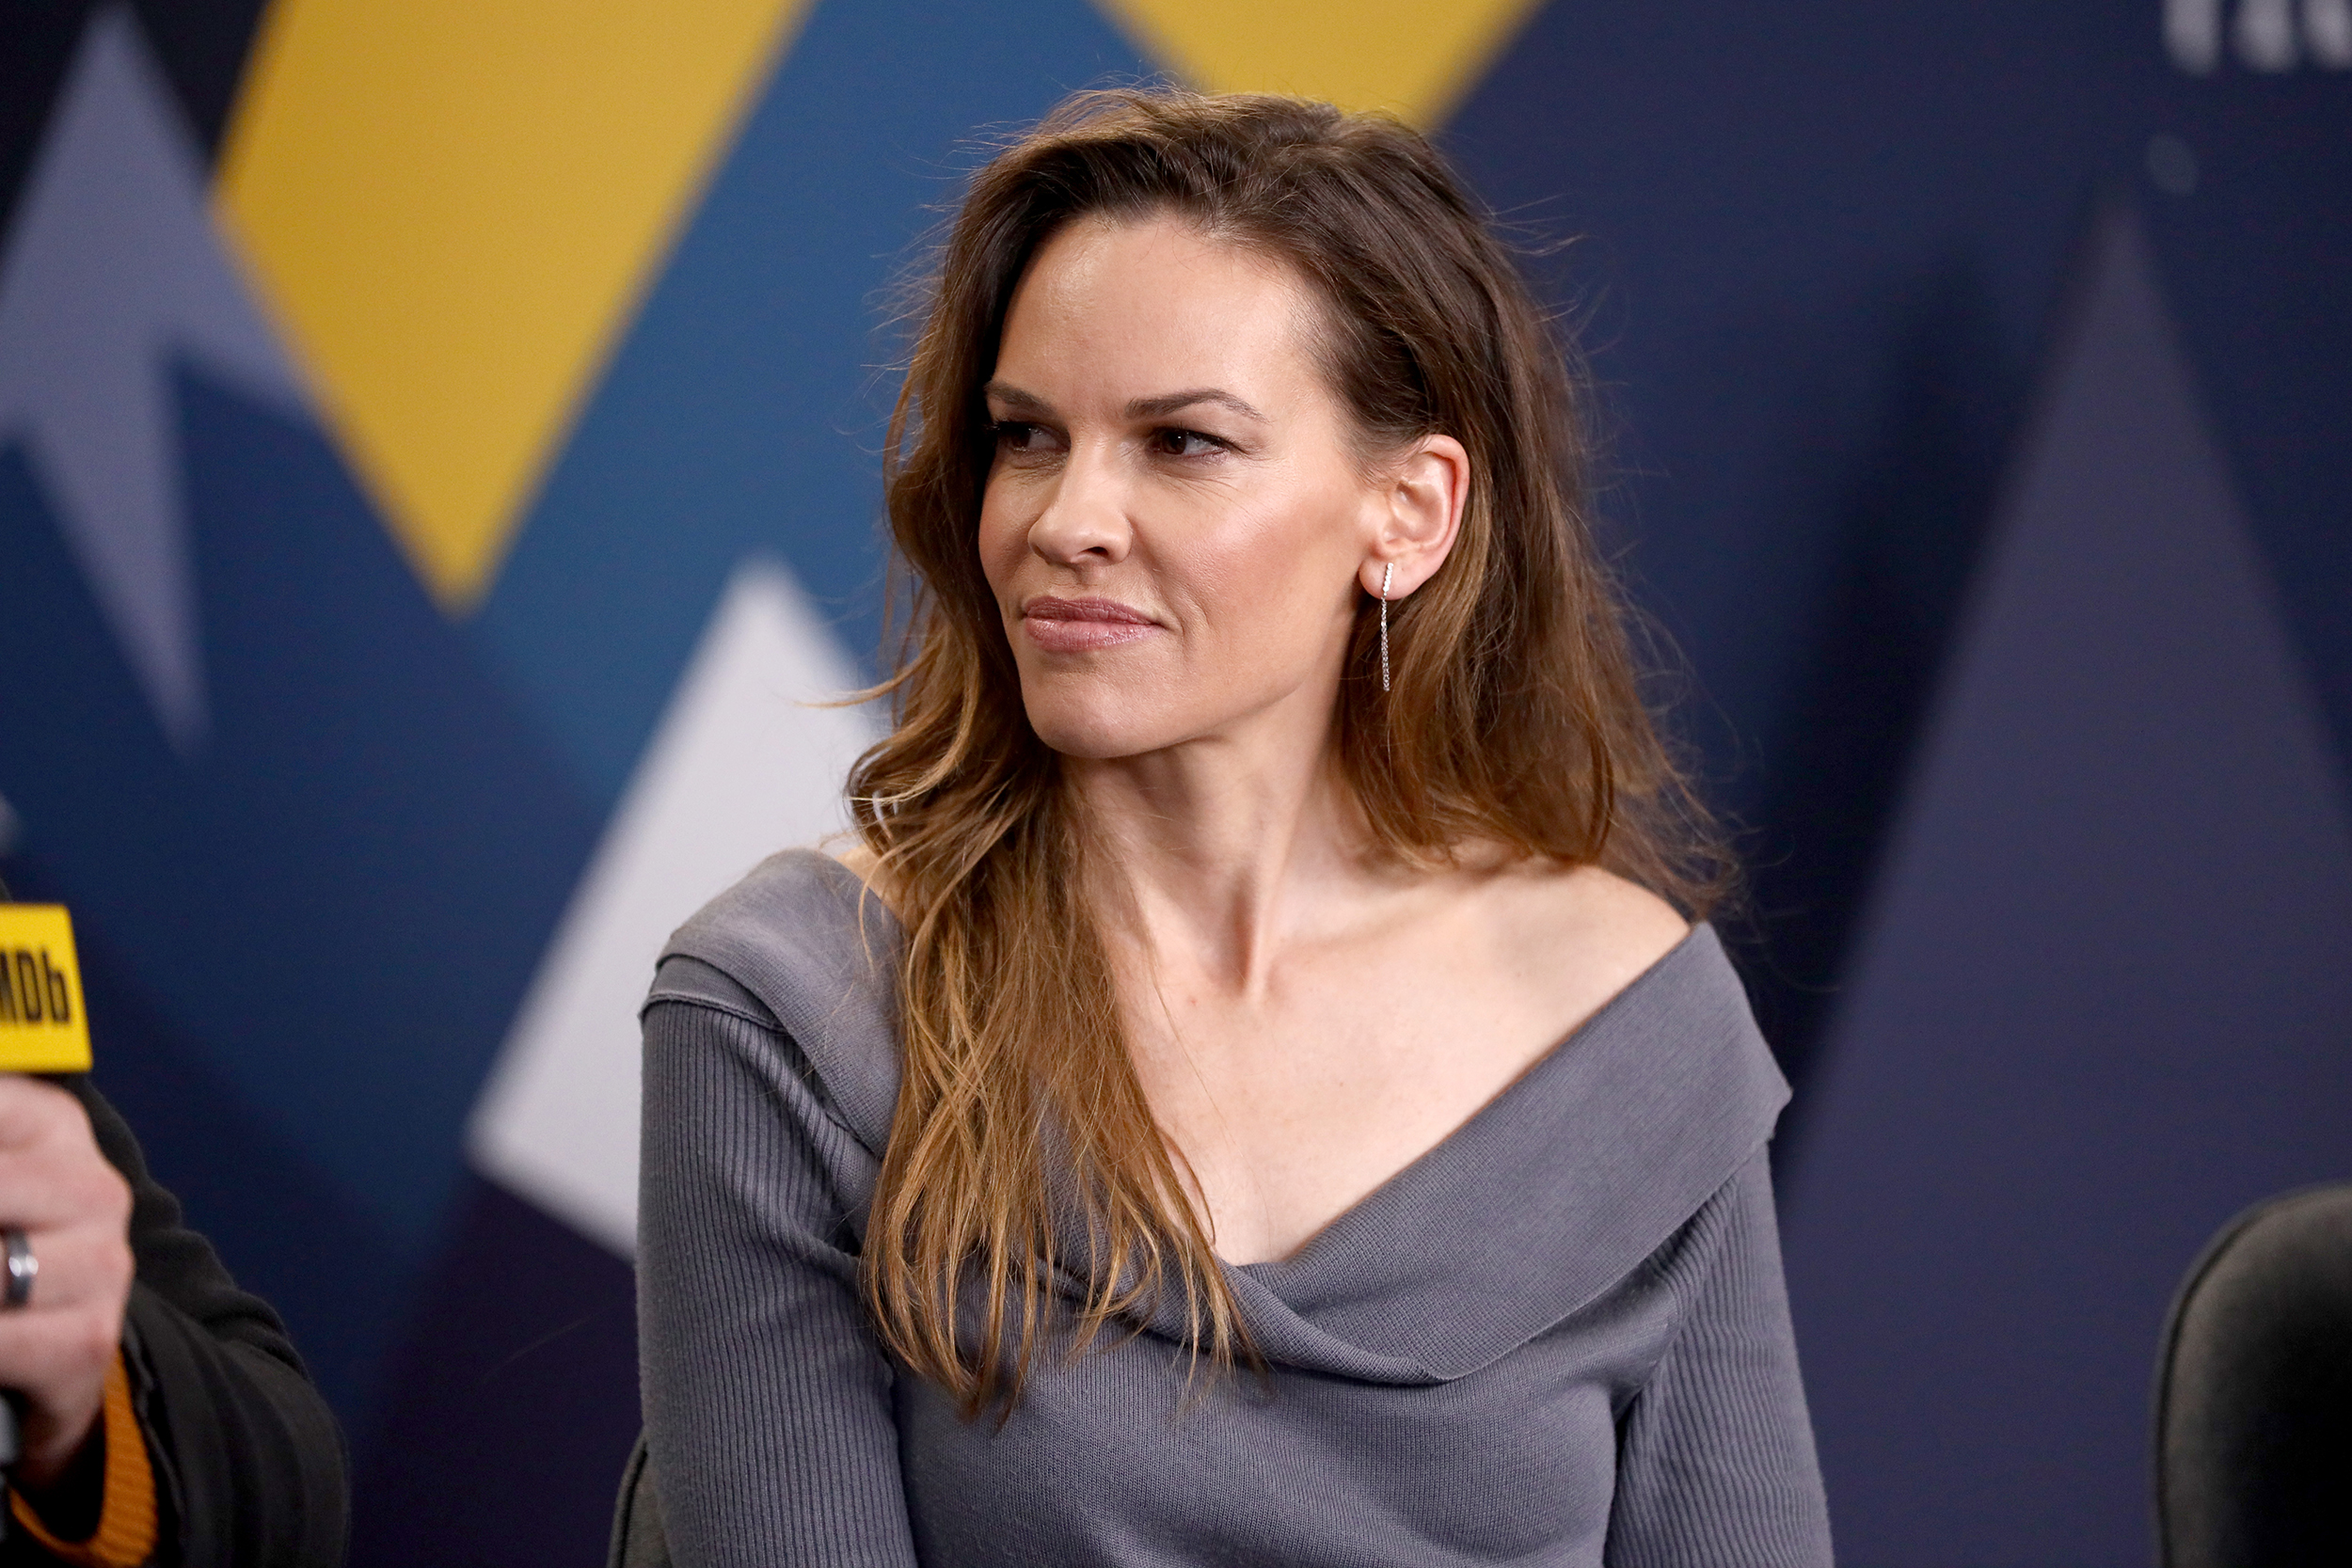 Pregnant Hilary Swank With Twins And Double Morning Sickness